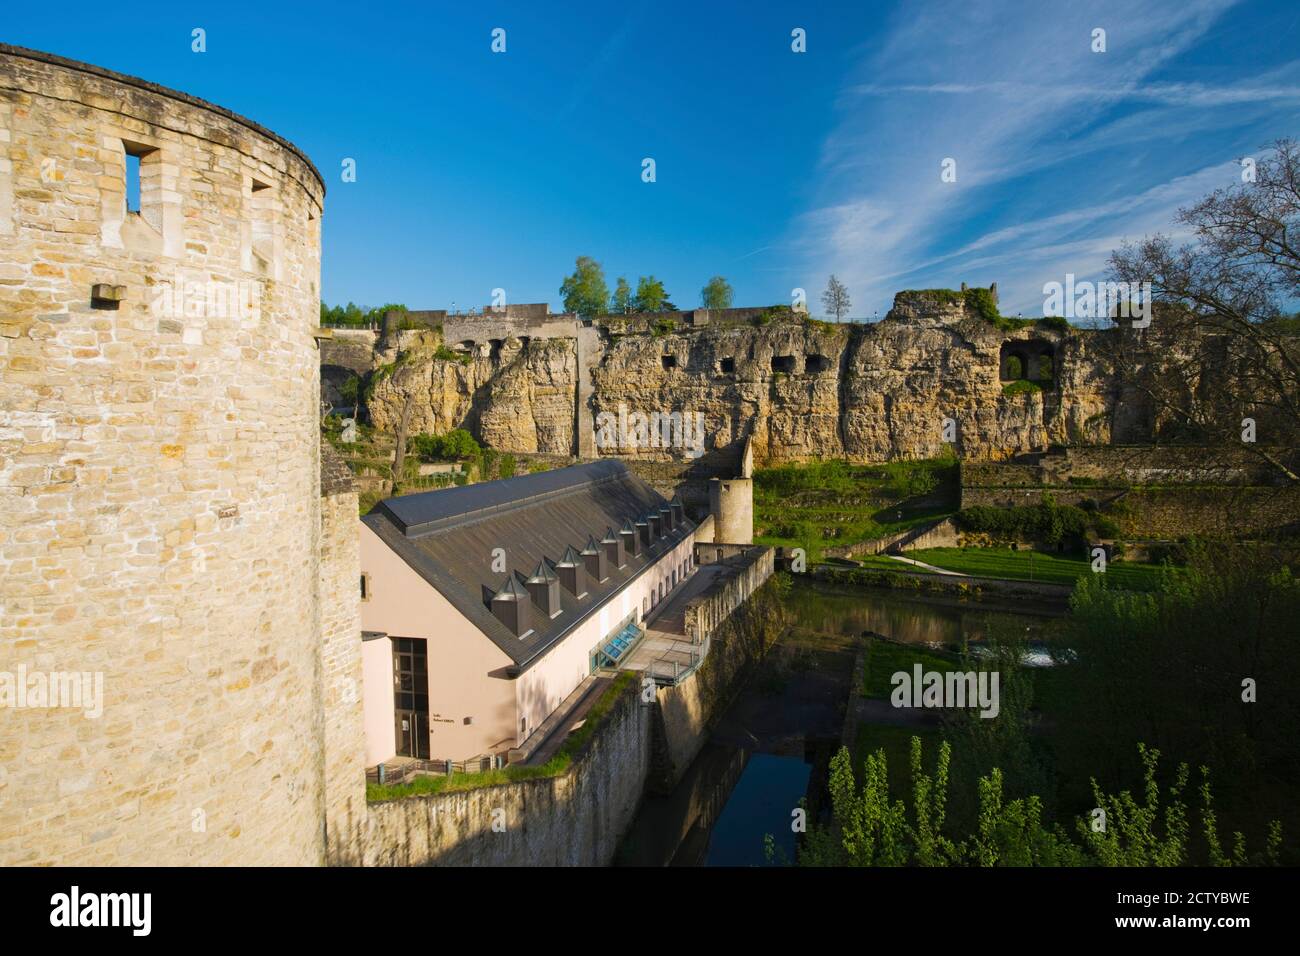 Ruins of a fortress built into rock wall, Casements du Bock, Luxembourg City, Luxembourg Stock Photo